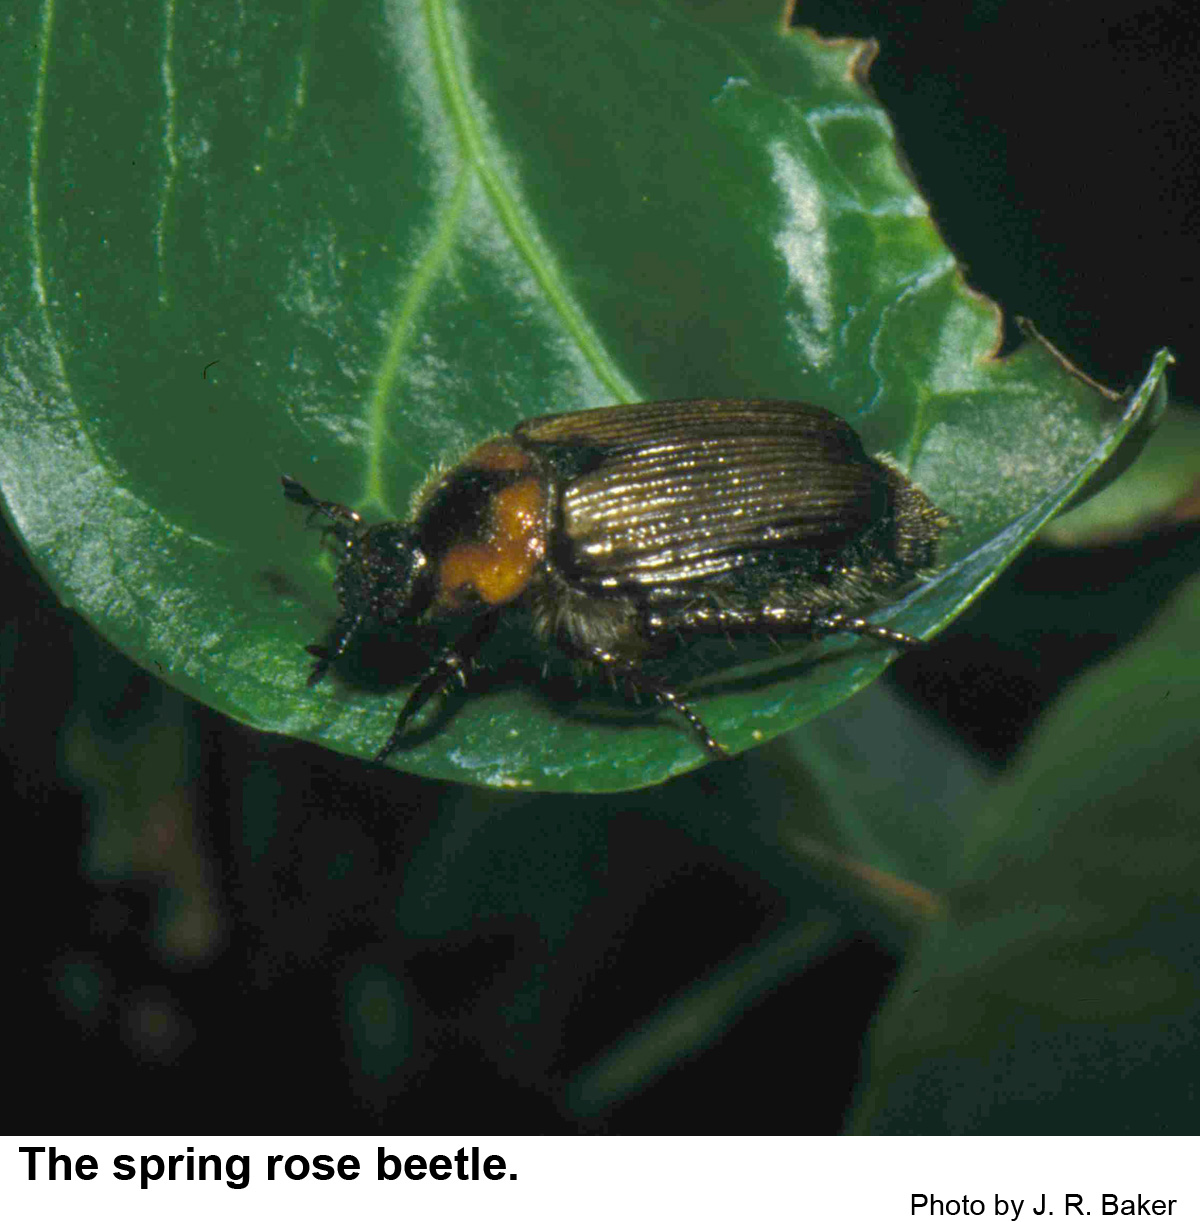 Spring rose beetles are about half an inch long.